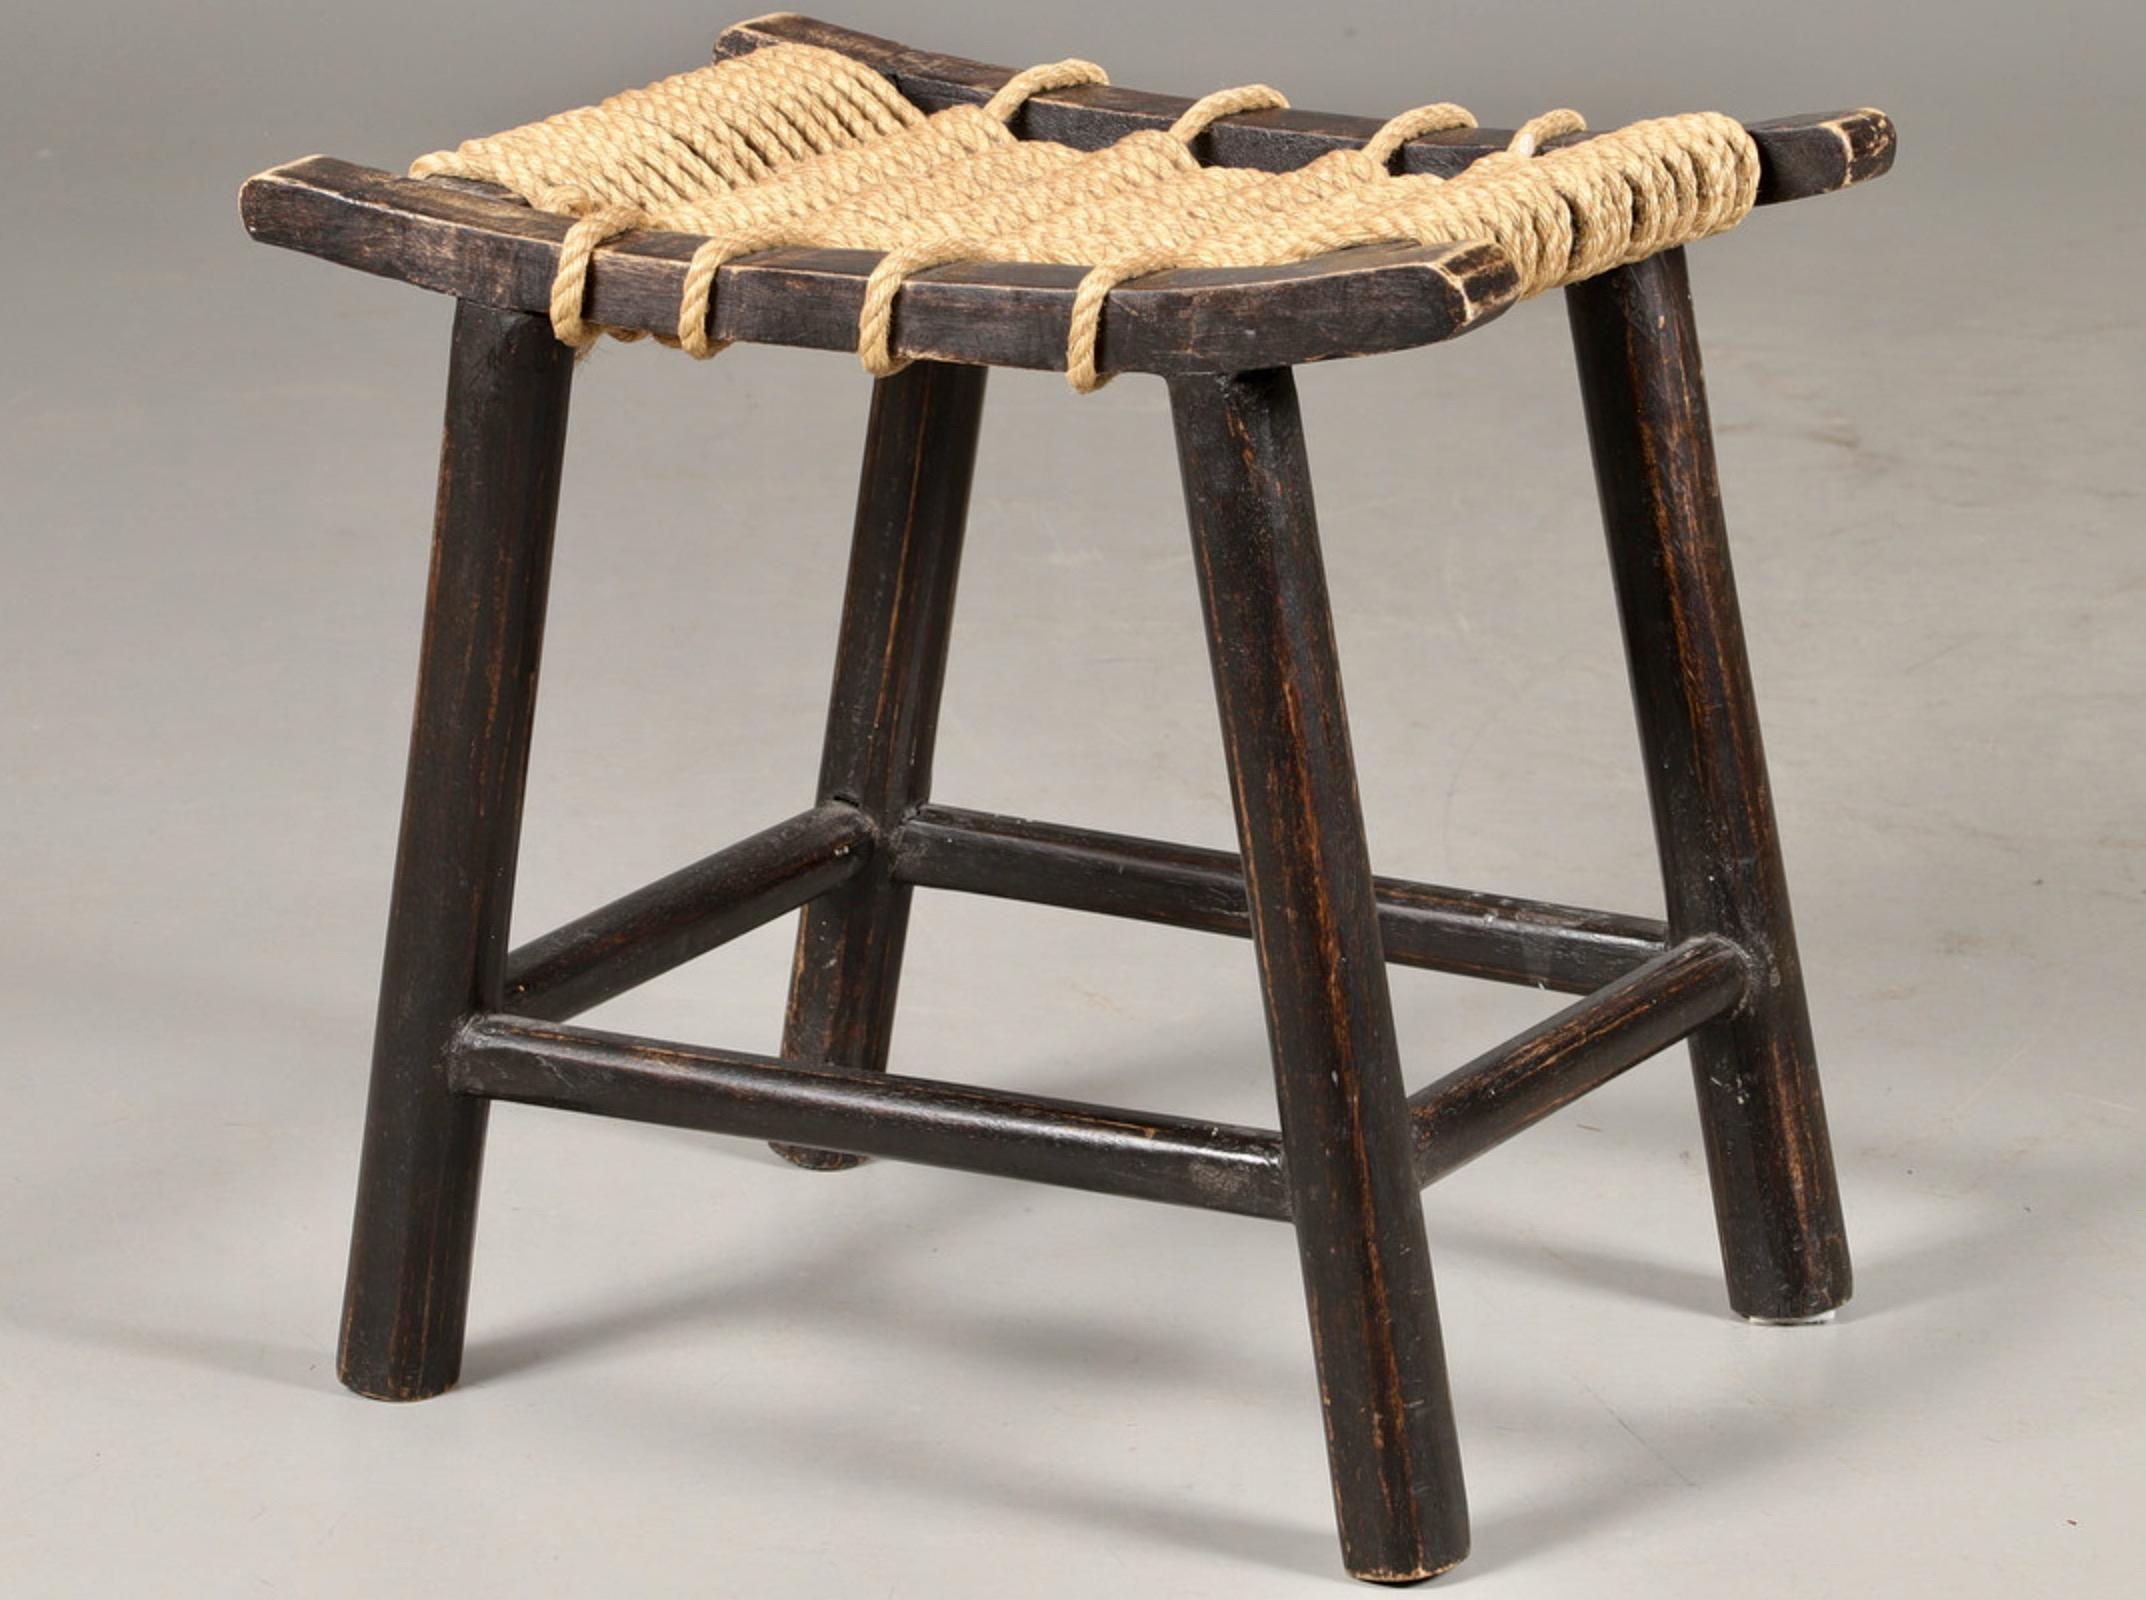 A fine set of three stools designed by Anne Lise Aas (1925–2020). They are made of oak which stained in a brownish/black color. The seats are have a rope knitting which is original and in good condition. The set is probably from the 1950´s or early